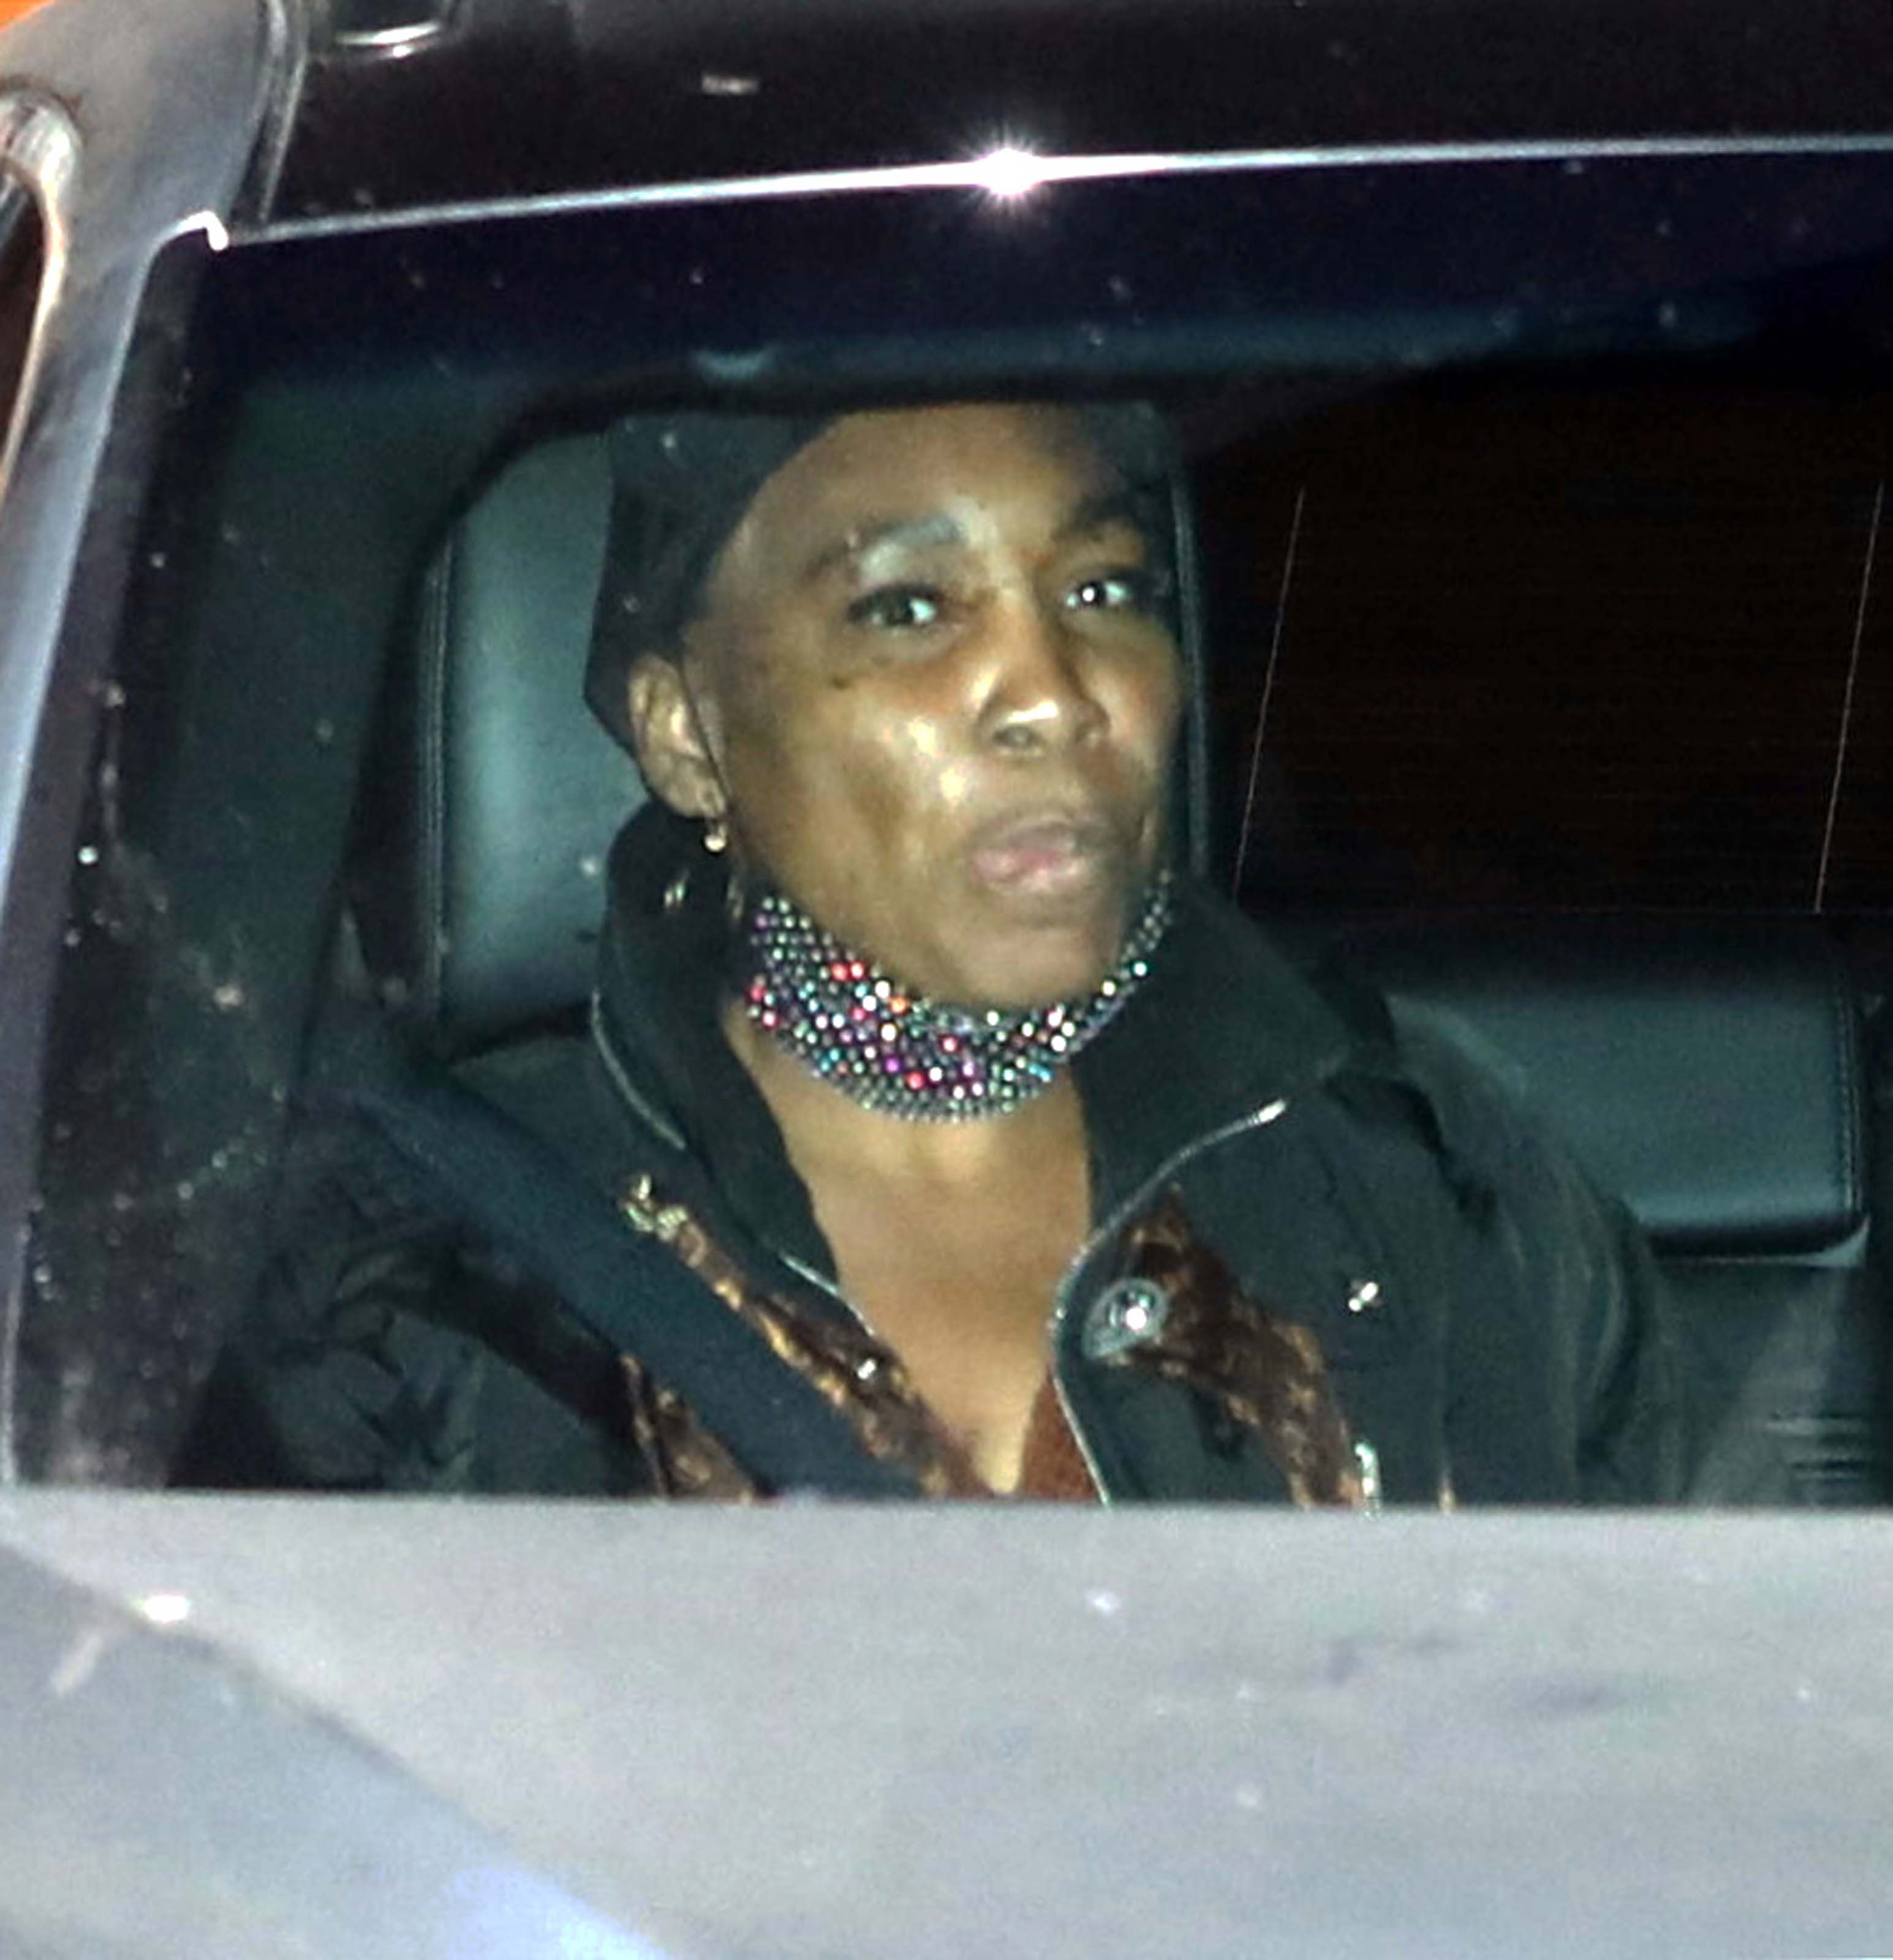 Venus Williams leaving her hotel after the Paris Fashion Week 2020